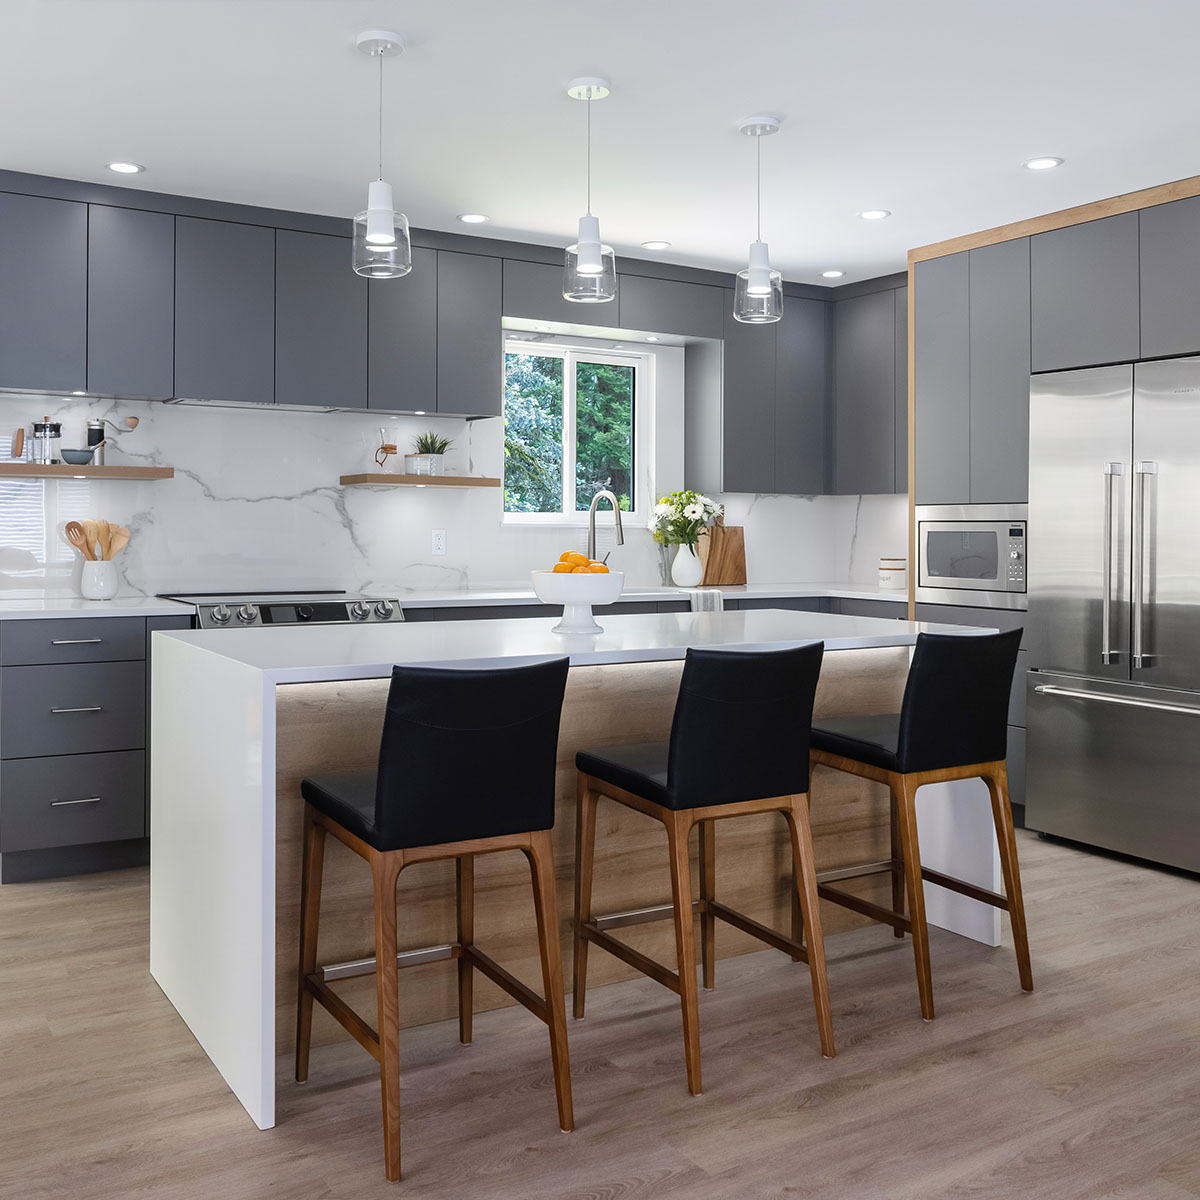 Modern kitchen with gray cabinets, white countertops, and stainless steel appliances. An island with a wooden base and three black bar stools is centered under three pendant lights.